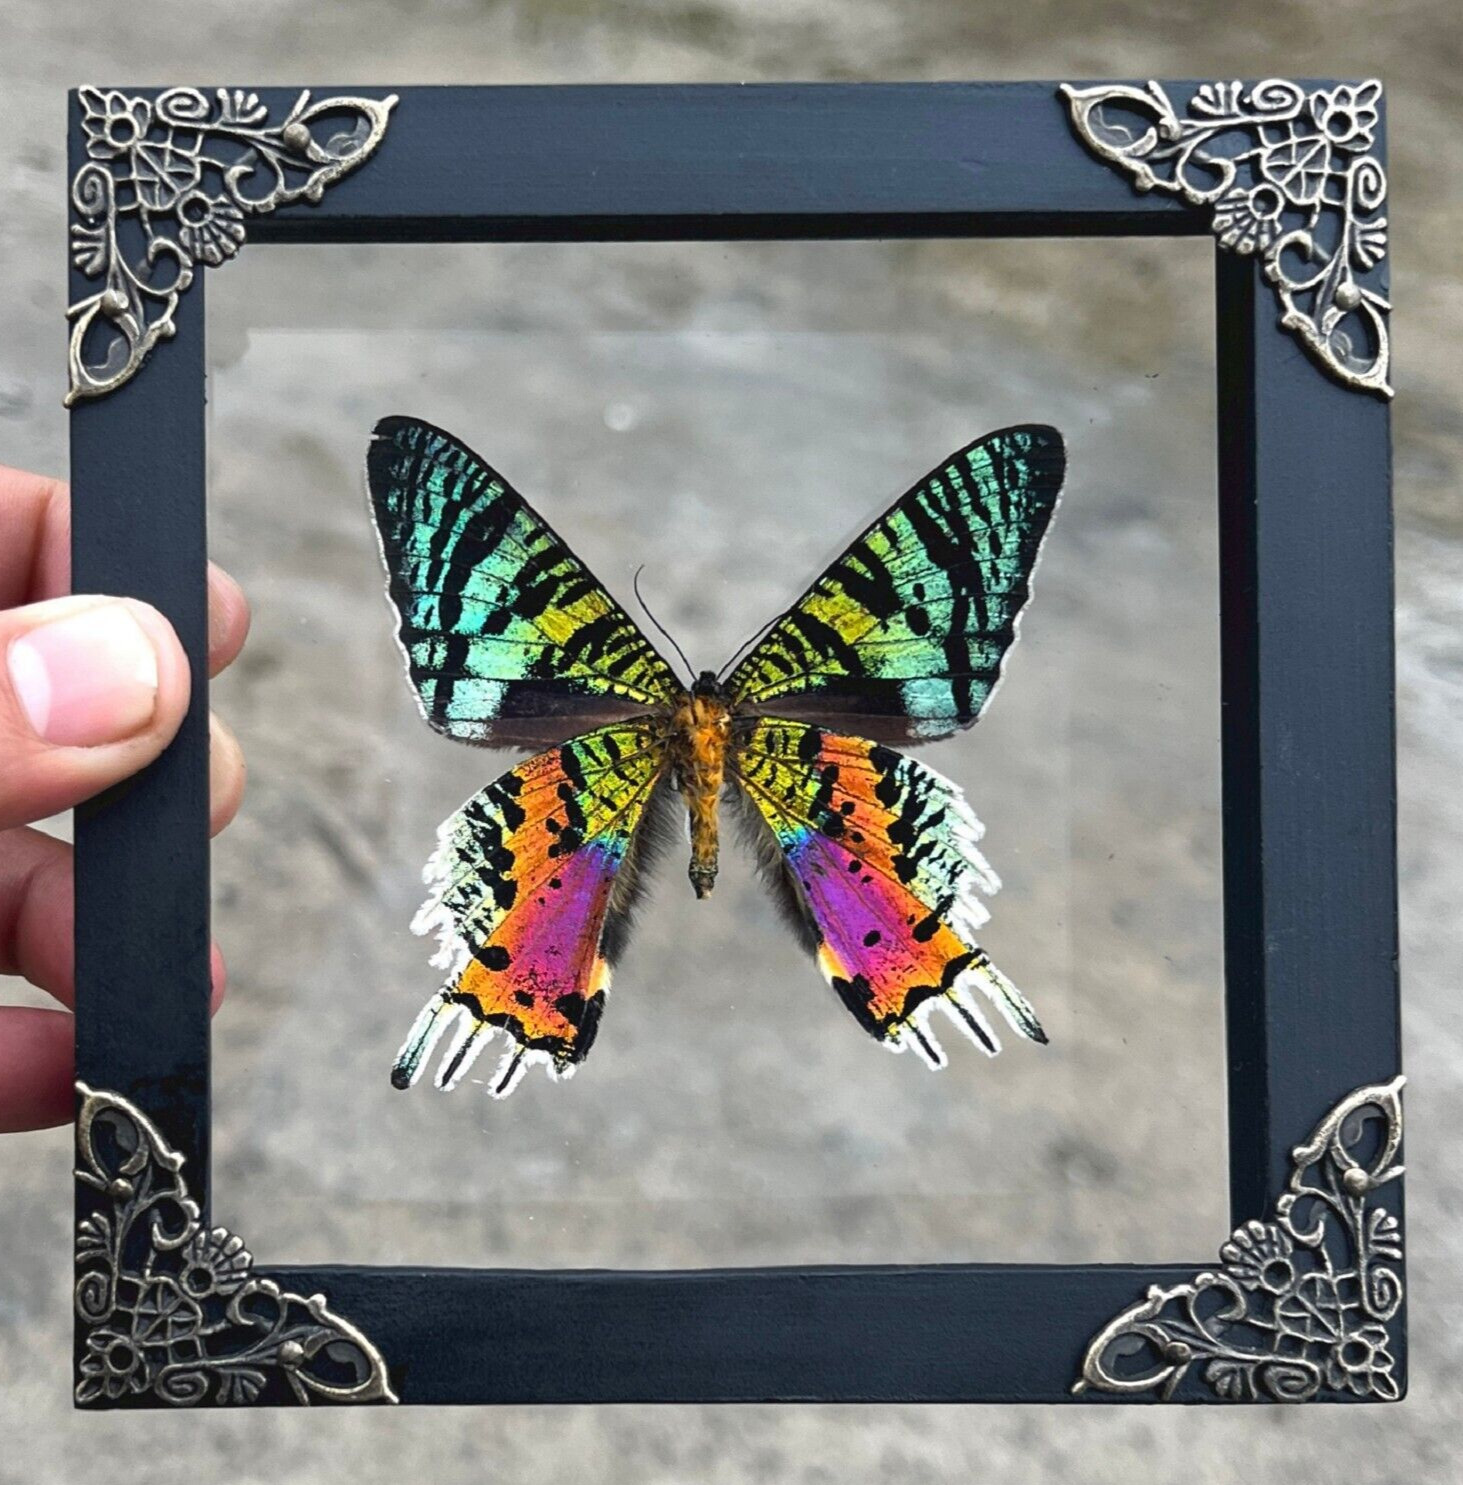 Madagascan Sunset Moth Framed Taxidermy Butterfly Clear Frame Antique Wall Decor